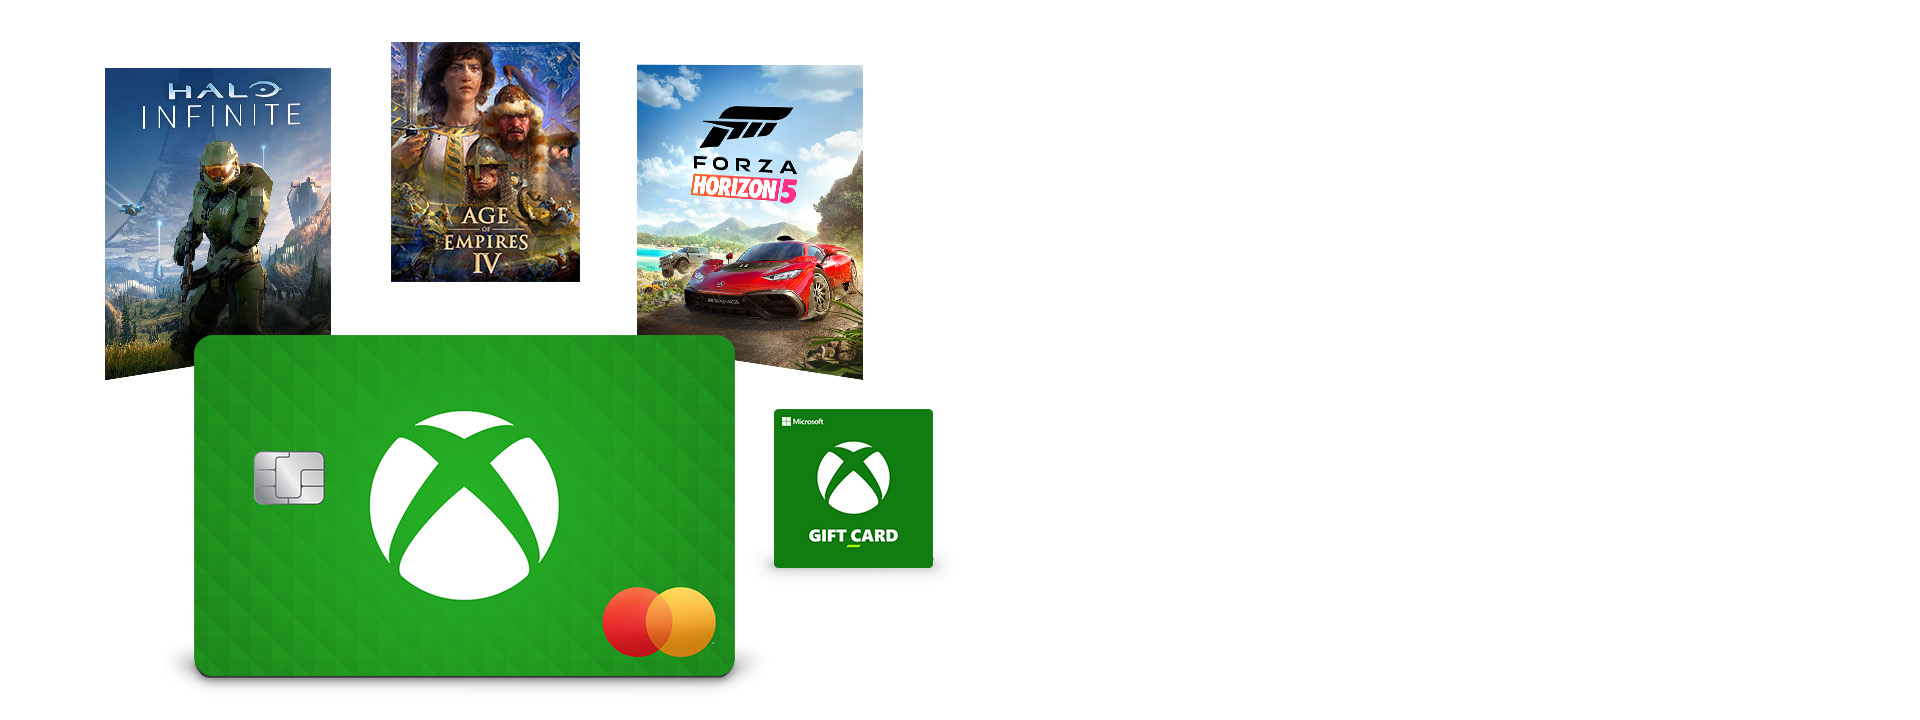 Xbox Credit card with Halo Infinite, Age of Empires IV, Forza Horizon 5, and Microsoft gift card